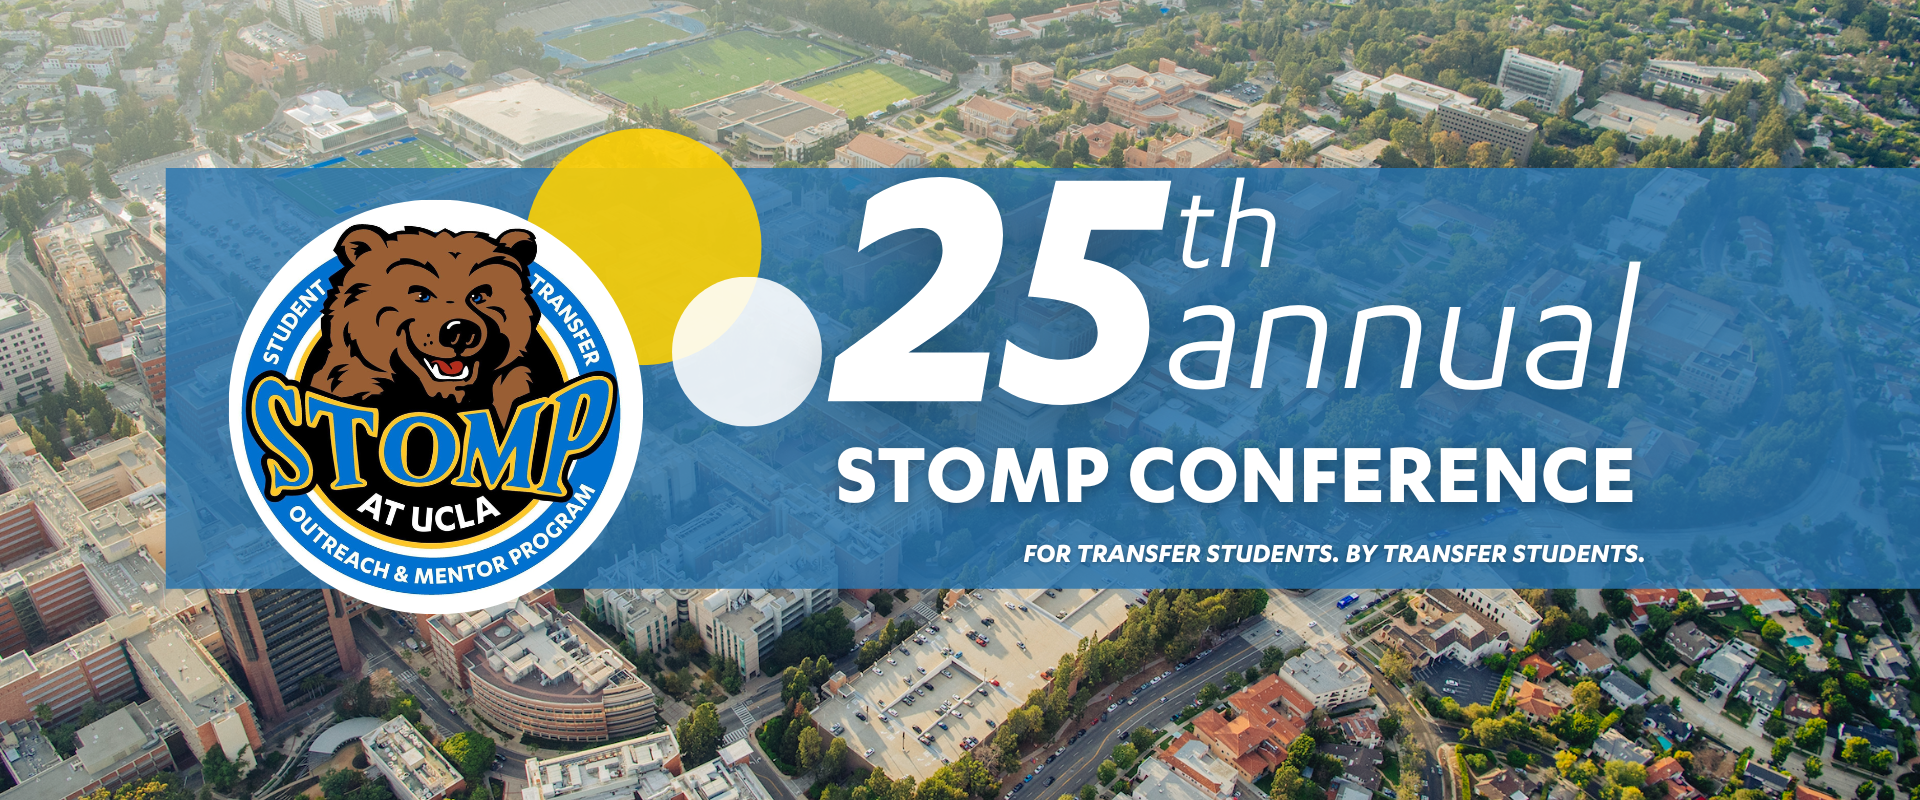 25th Annual STOMP Conference | For tranfer students, by transfer students 